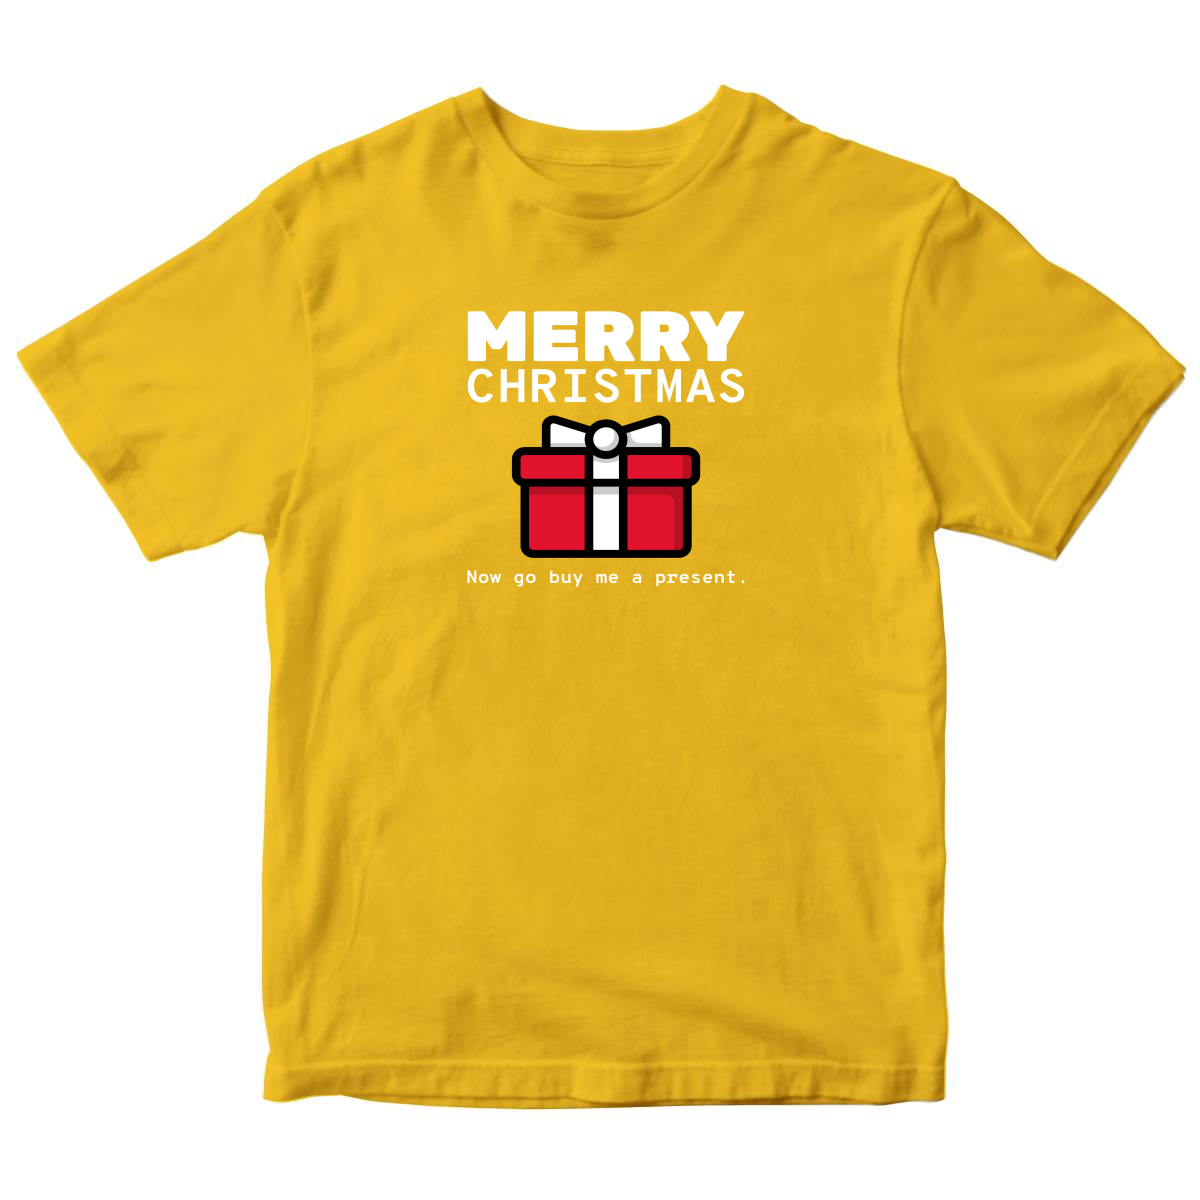 Merry Christmas Now Go Buy Me a Present Kids T-shirt | Yellow